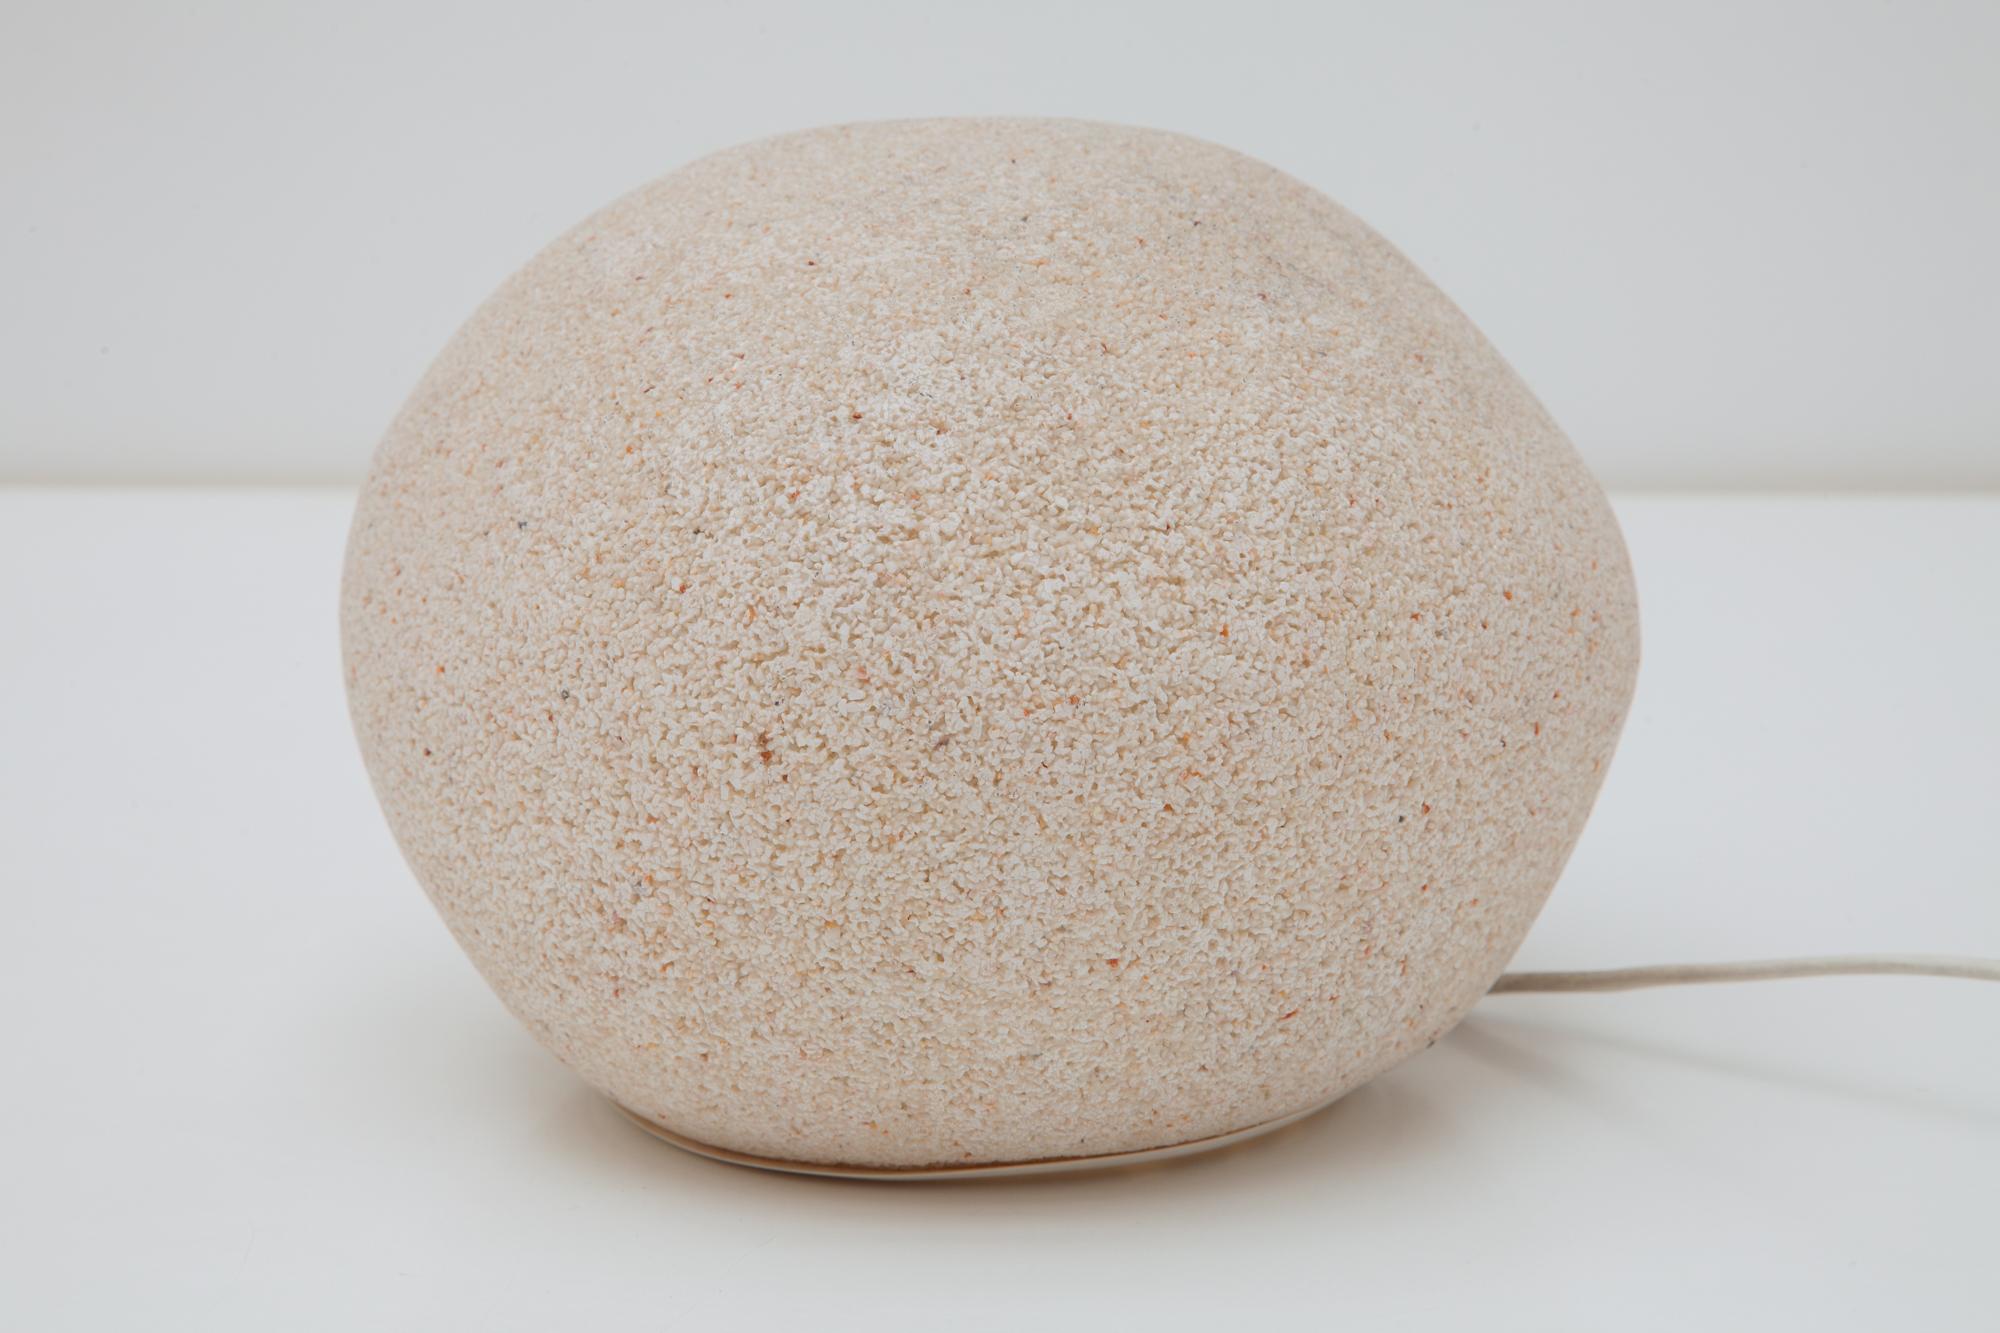 Vintage faux stone lamp by Luminaires Roland Jamois, France. Designed by Andre Cazenave, 1980s. Made with glass-reinforced polyester with embedded marble powder. A beautiful natural element depicted stone in resin designed gives a creative accent to